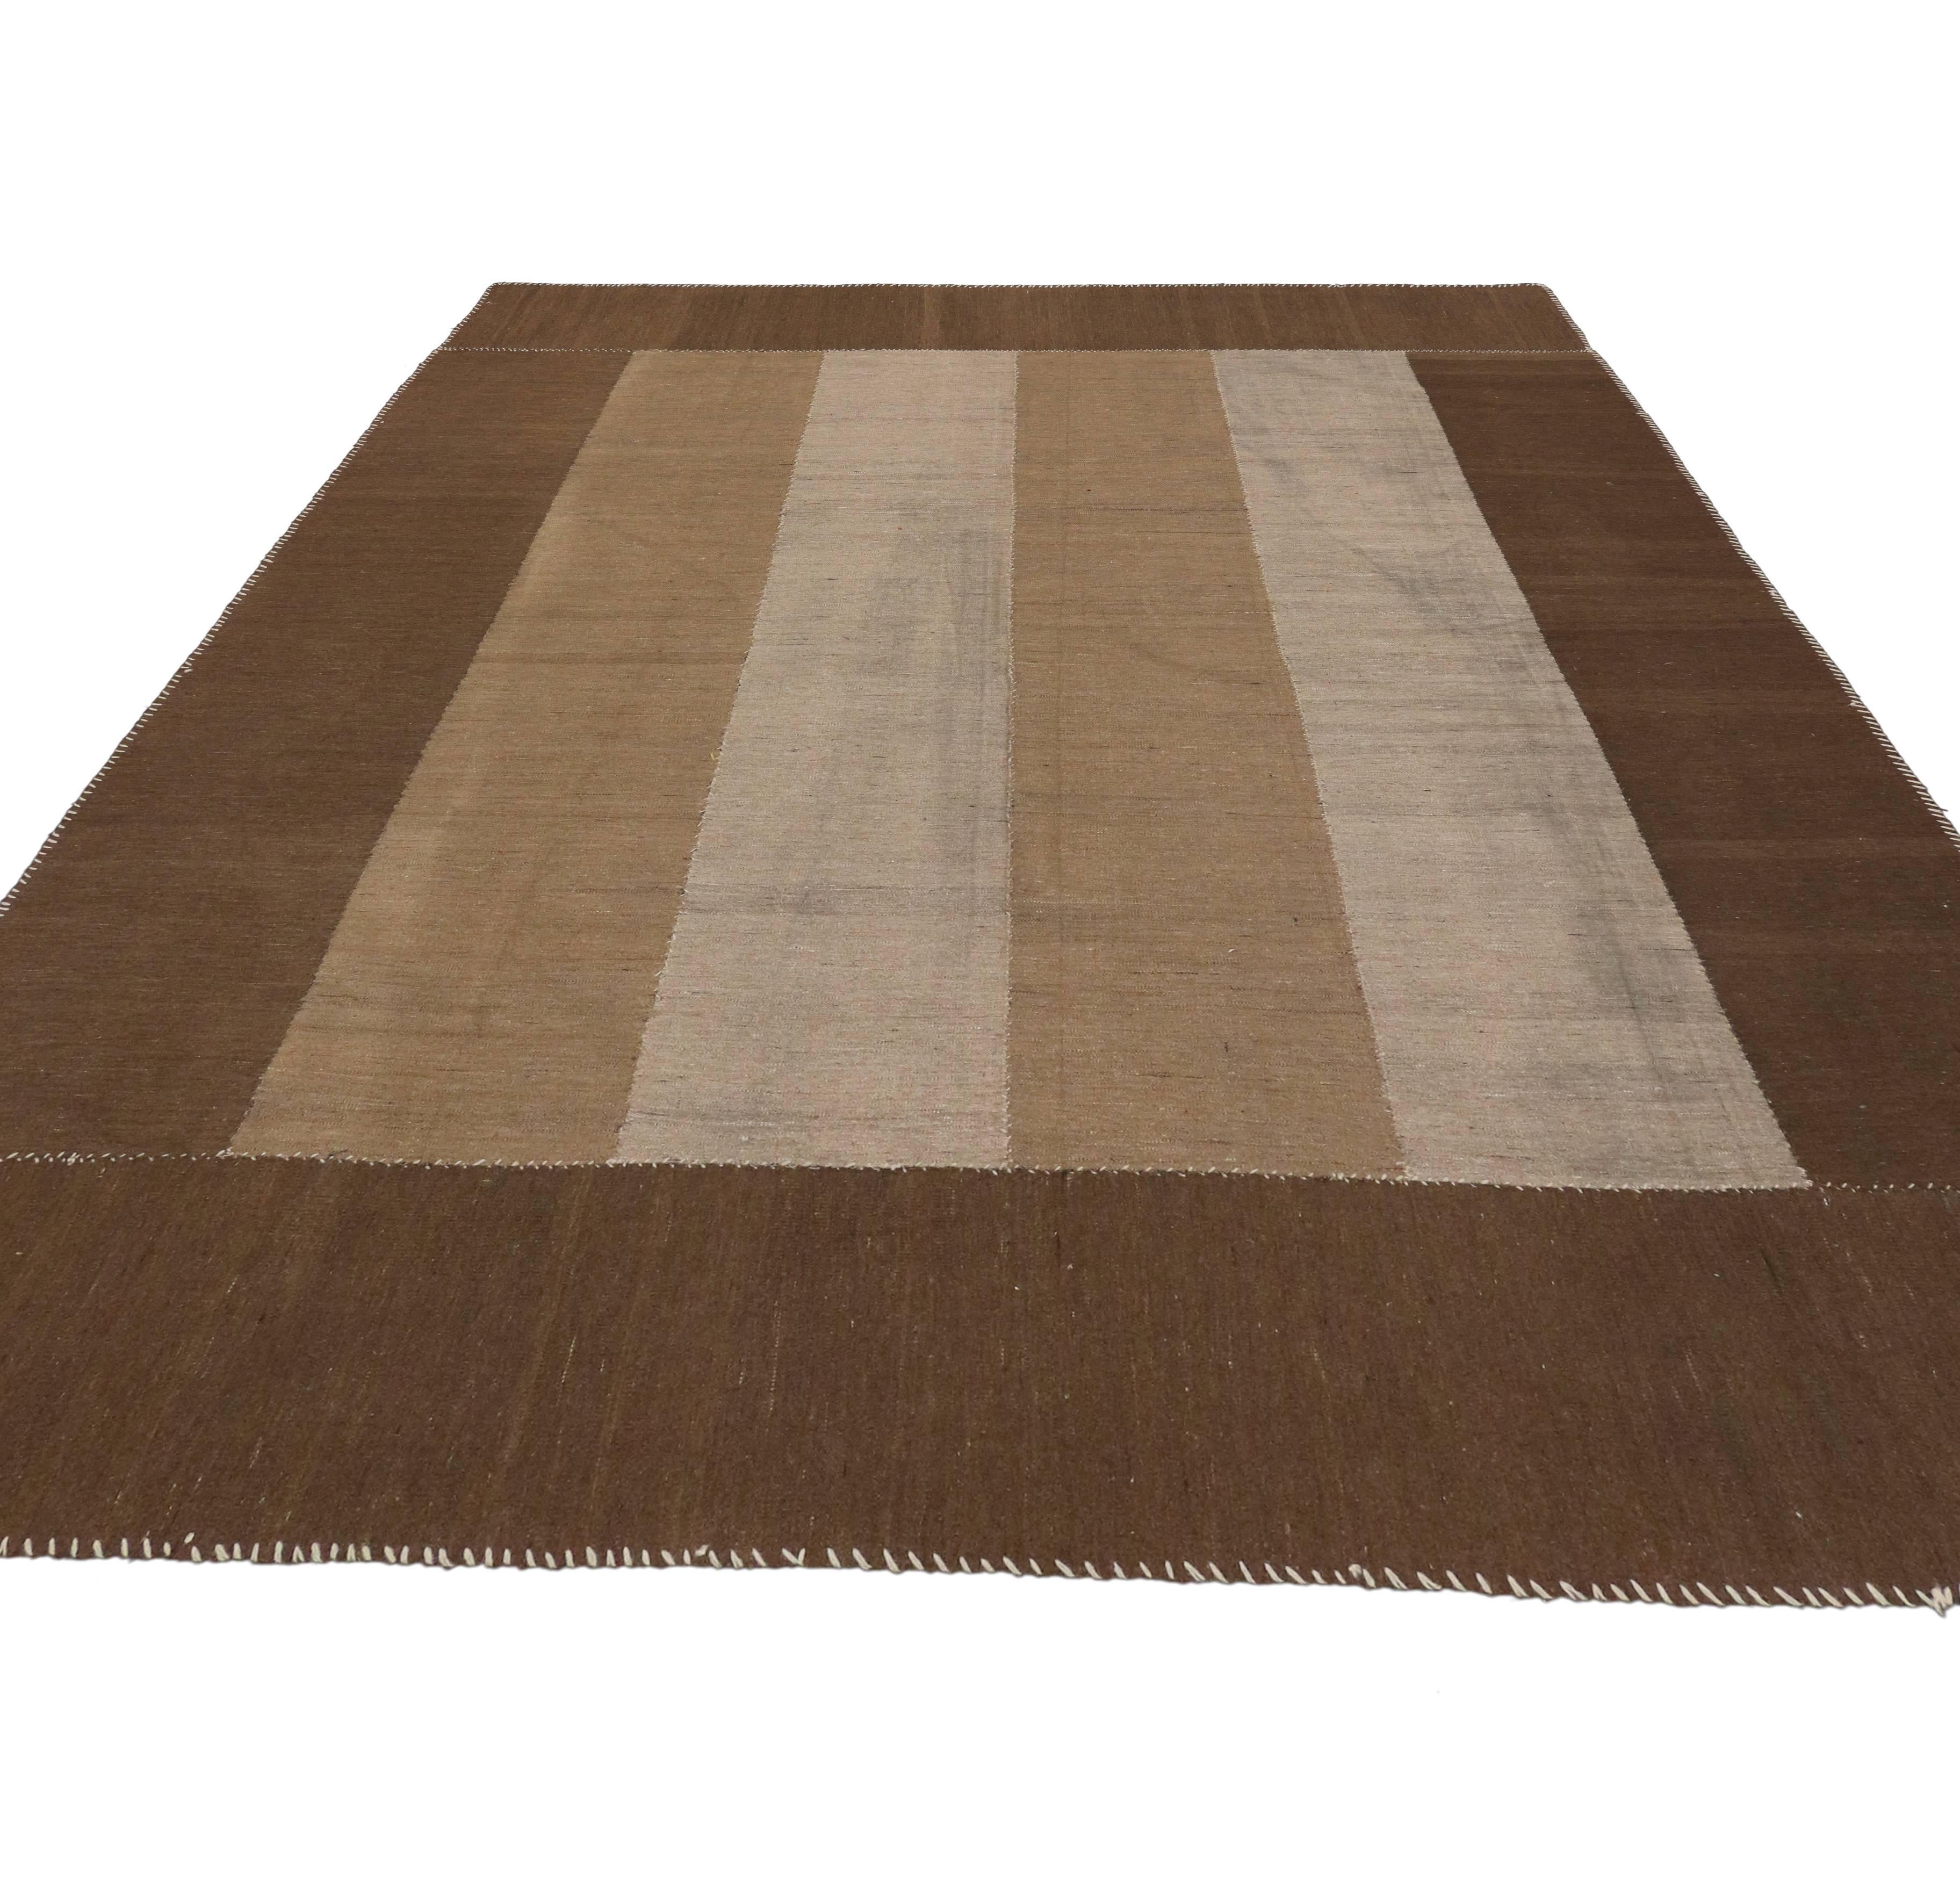 Hand-Woven Vintage Persian Kilim Rug with Modern Style